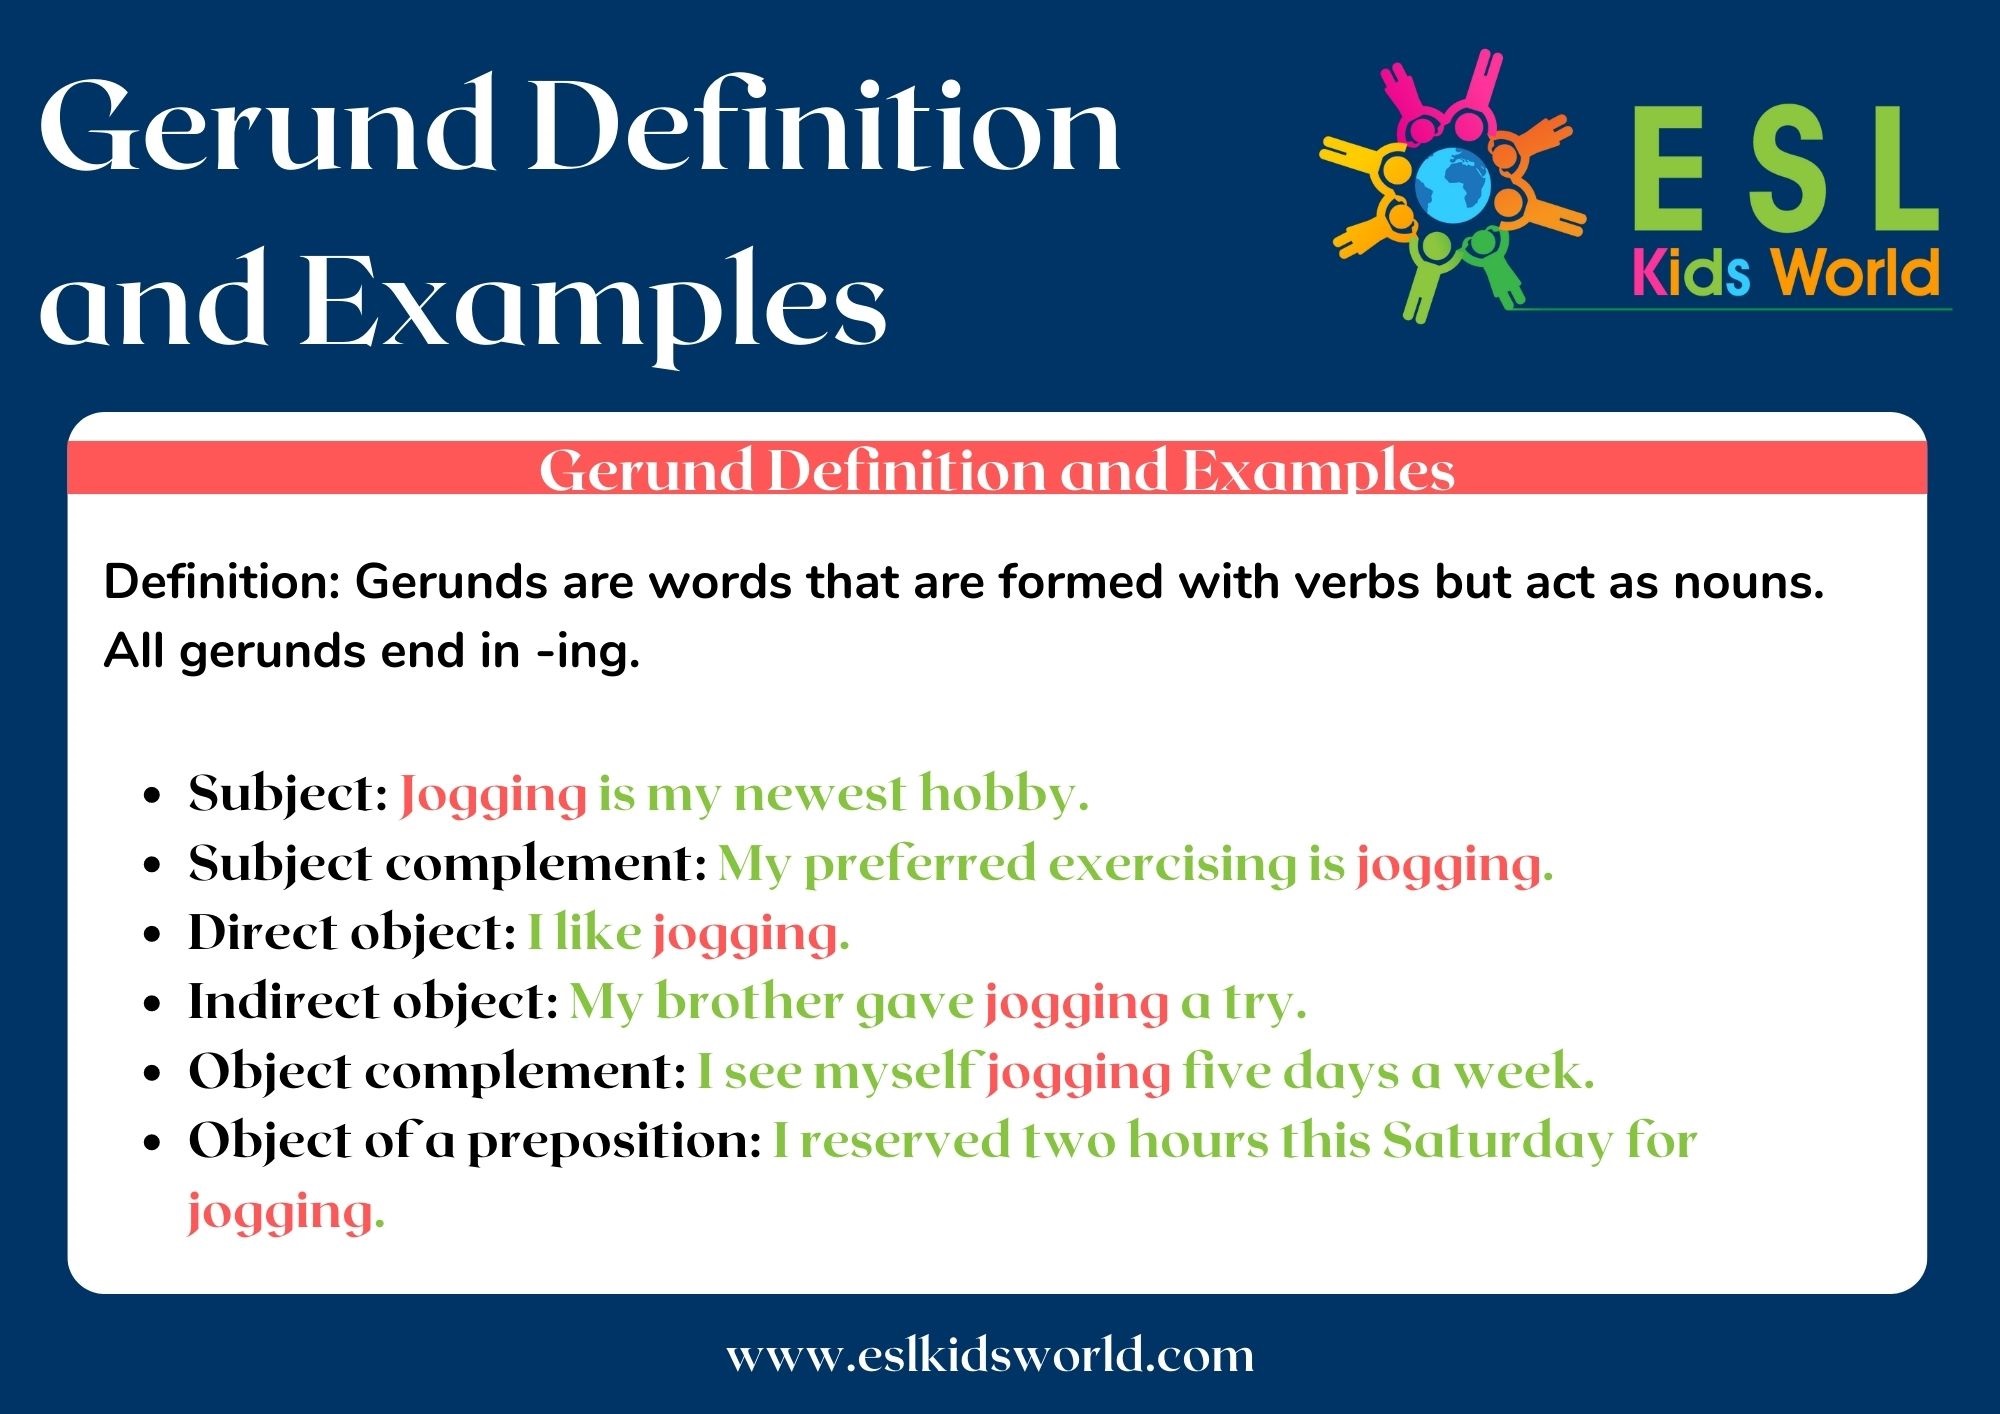 gerund-definition-and-examples-what-are-gerunds-esl-kids-world